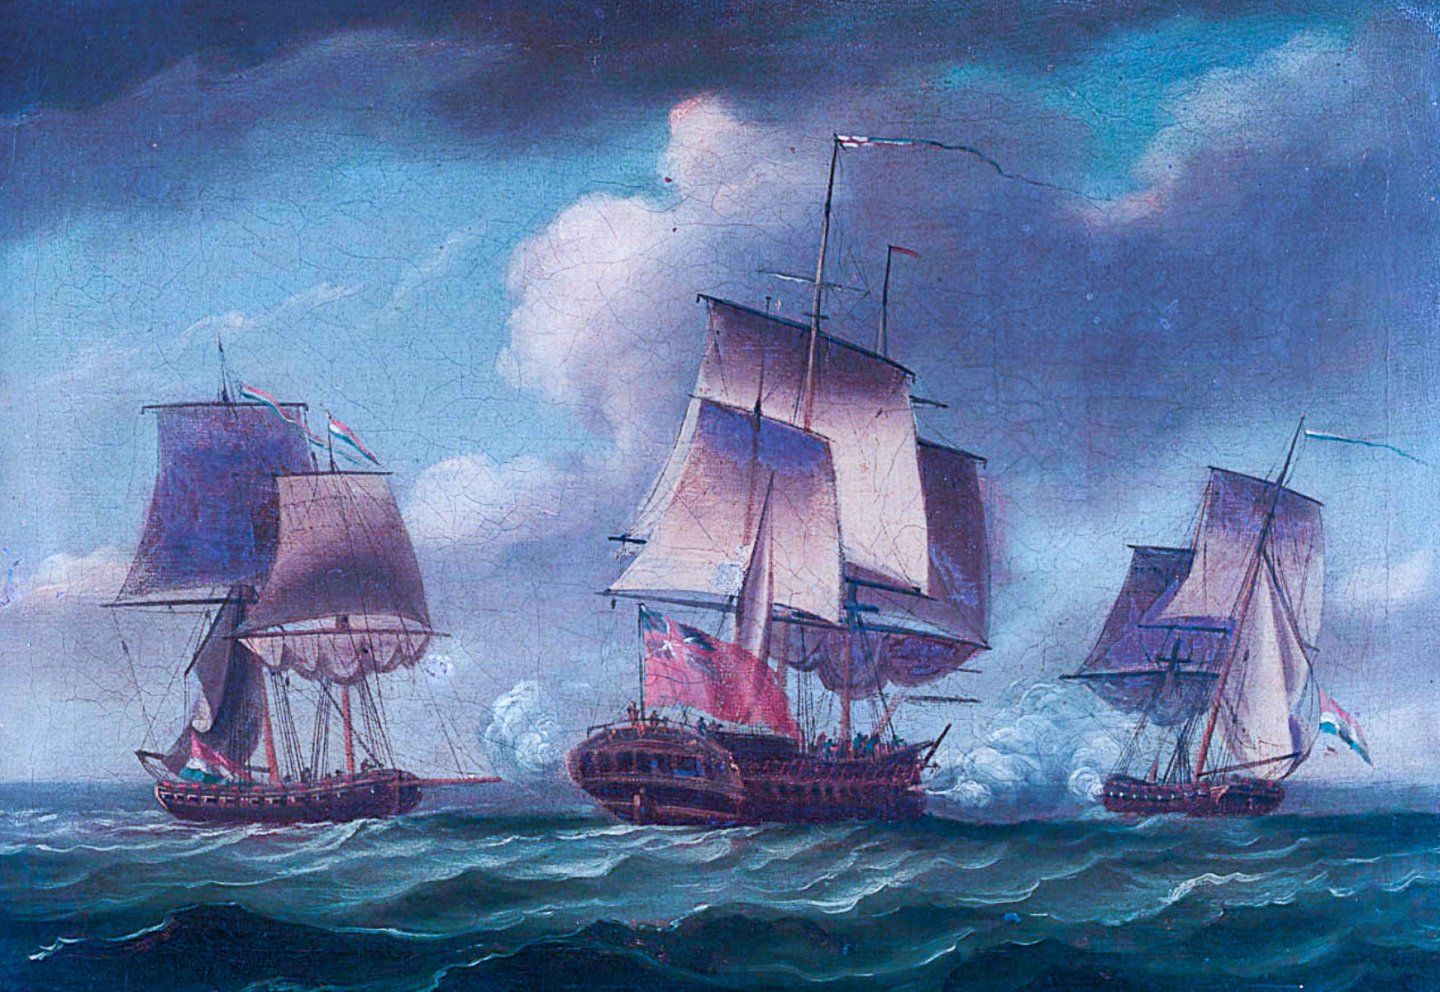 R_Dodd_The 'Artois' capturing two Dutch privateers, 3 December 1781-recoloured2021.jpg